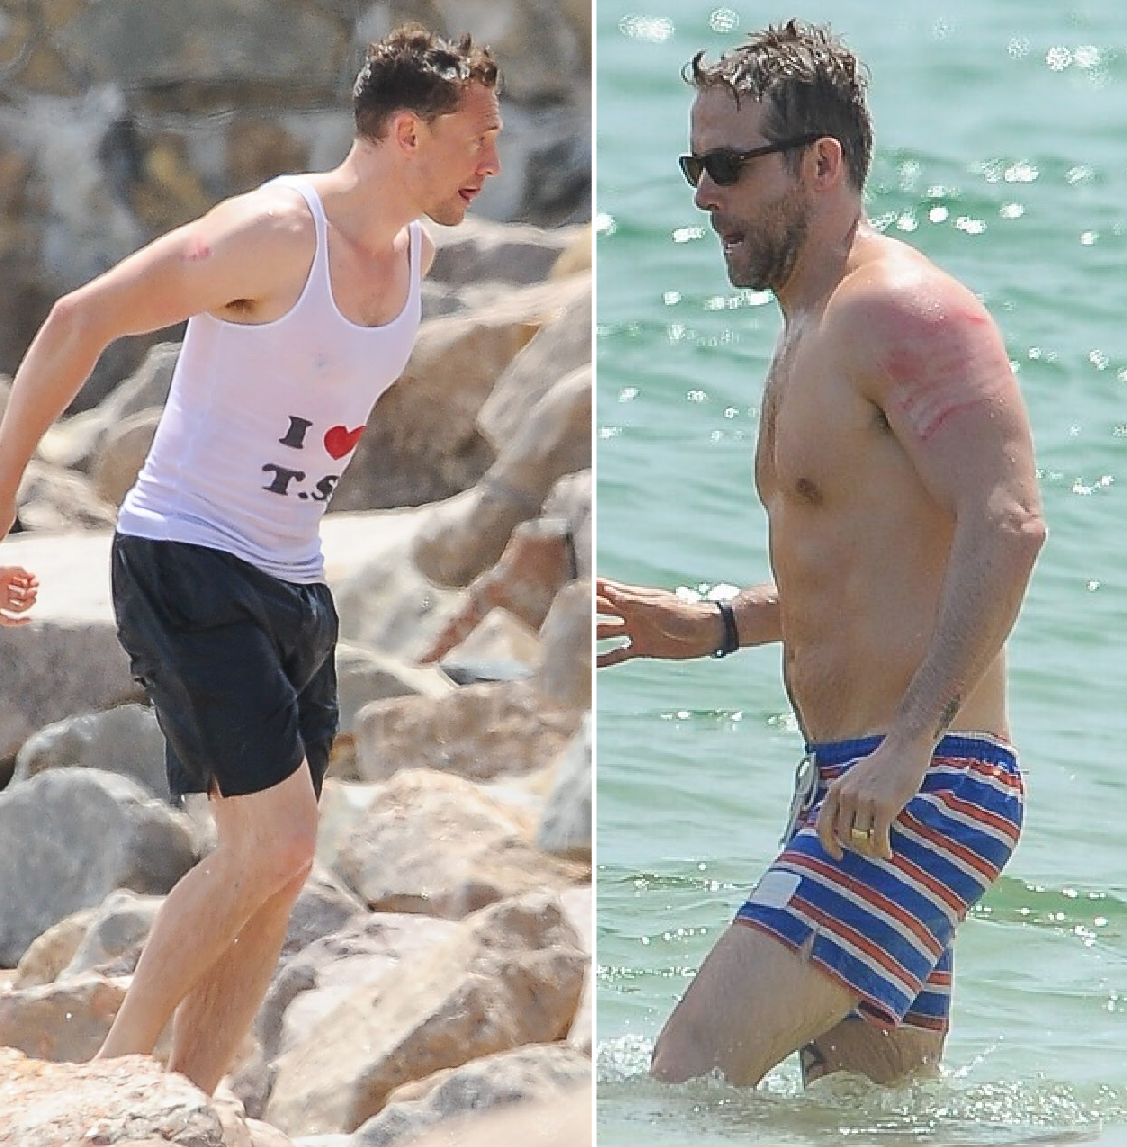 Tom Hiddleston & Ryan Reynolds looked over the weekend in their "I...